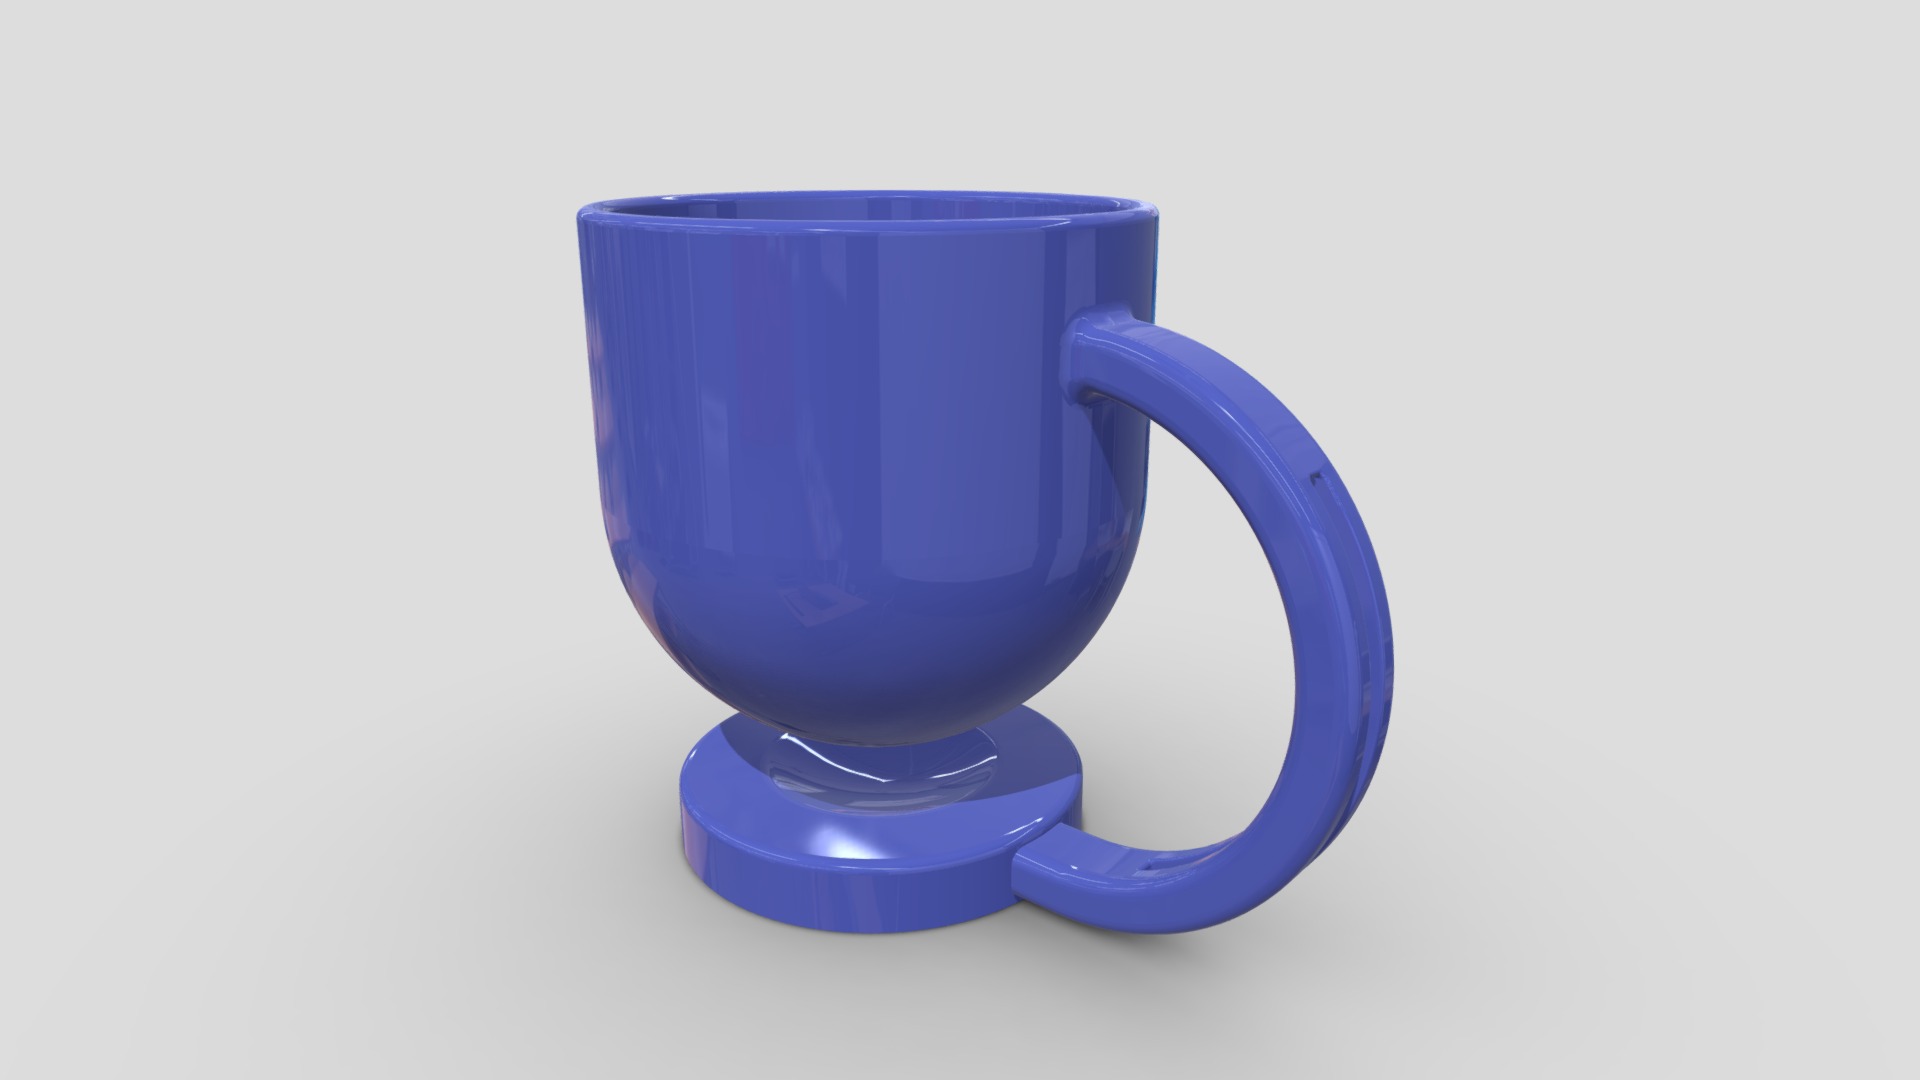 3D model Mug Cup ready to print 3D - This is a 3D model of the Mug Cup ready to print 3D. The 3D model is about a blue pitcher with a handle.